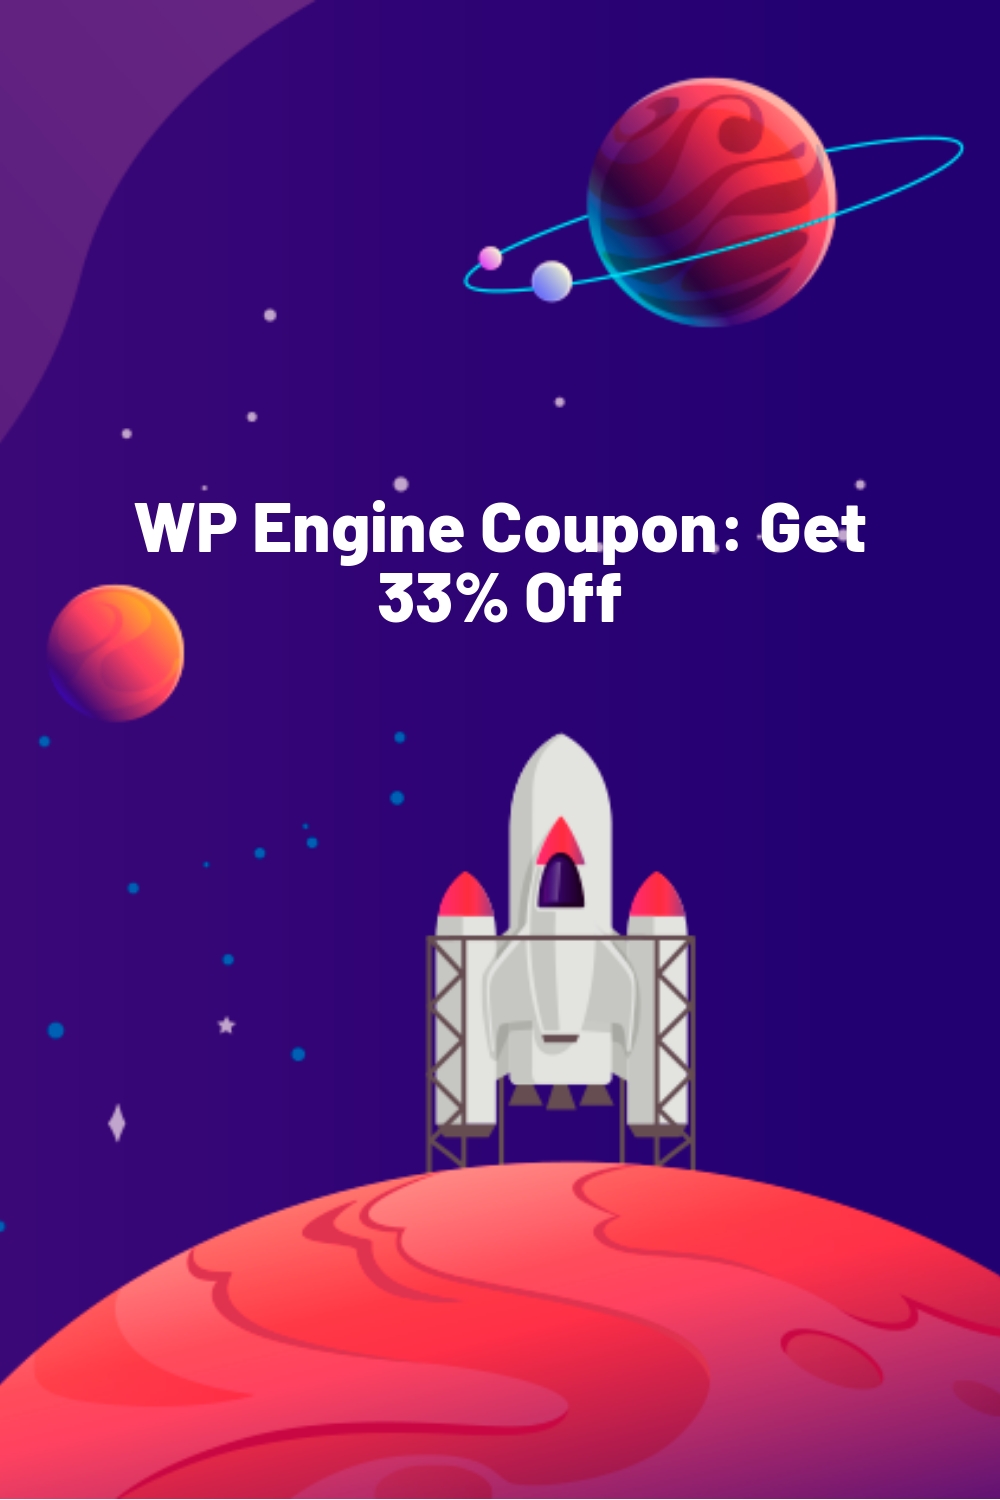 WP Engine Coupon: Get 33% Off